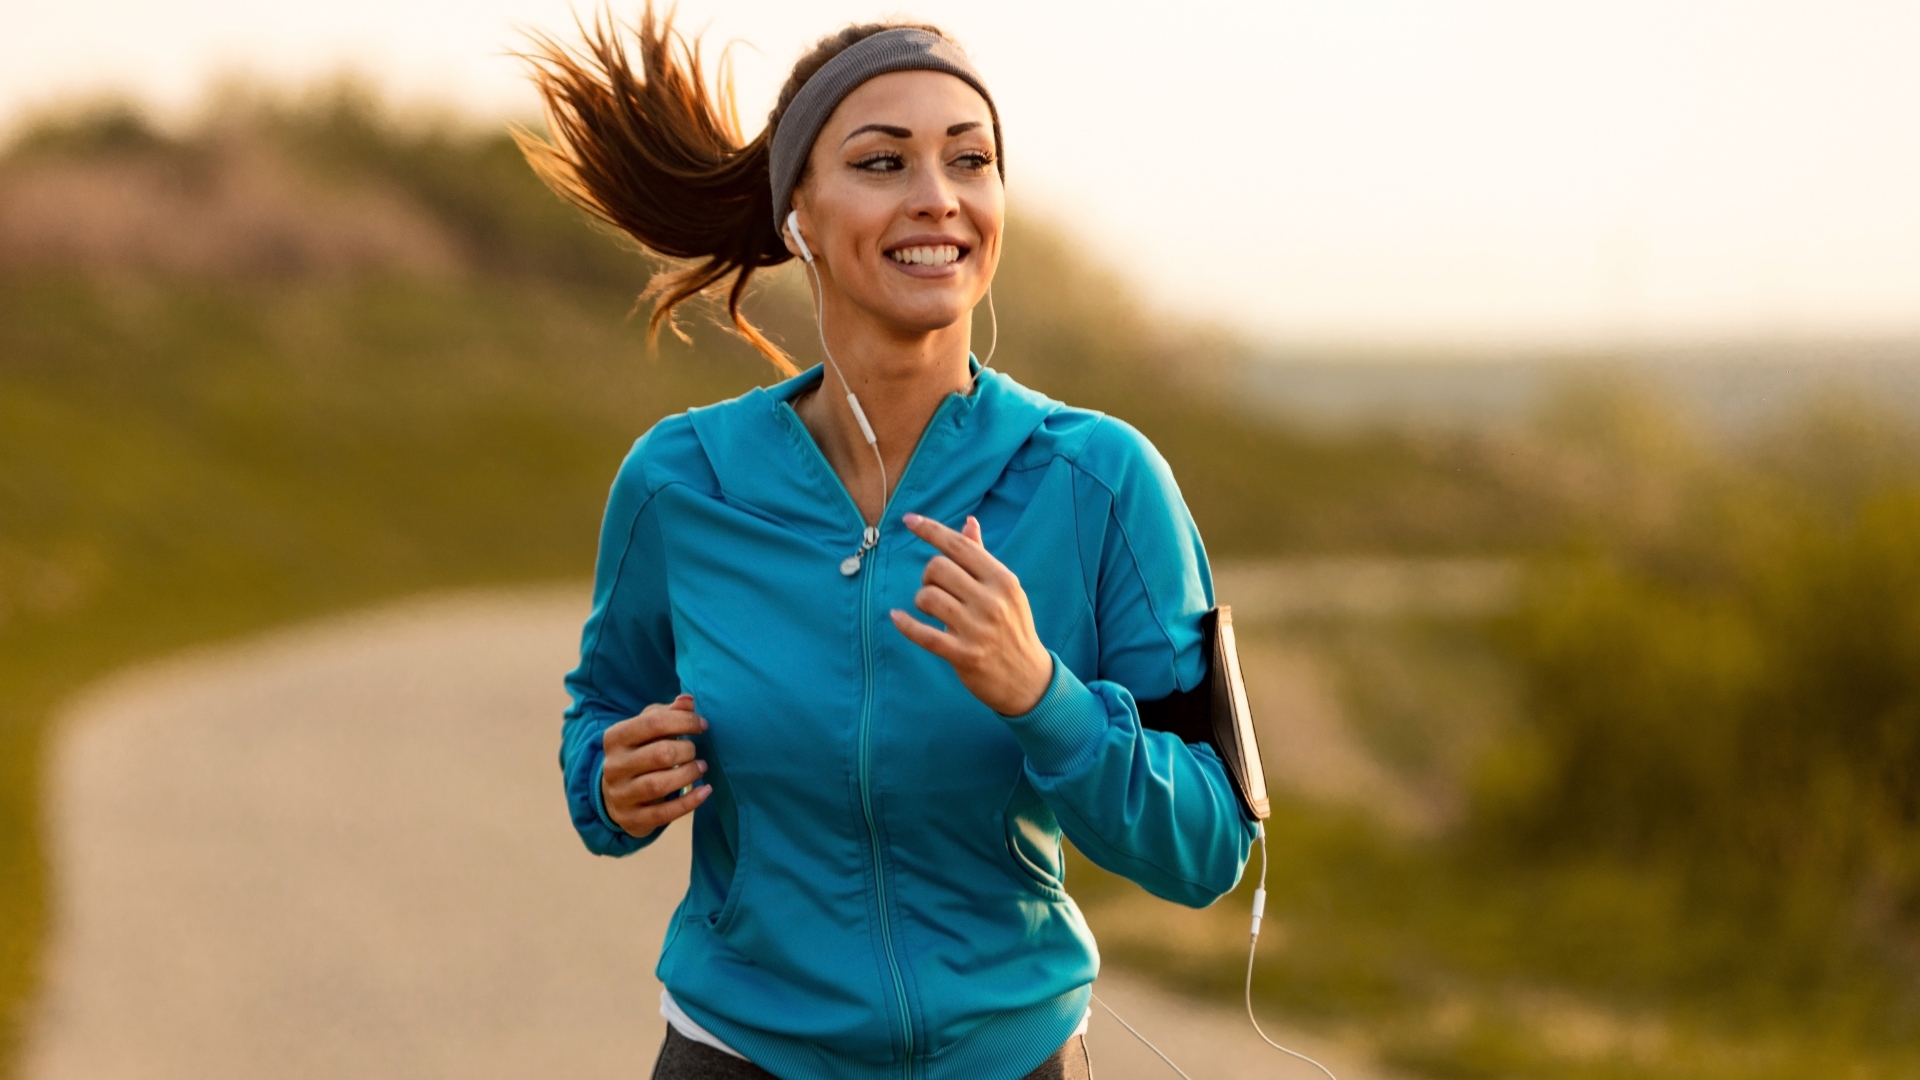 Get outdoors and stay fit by taking a run with these great products